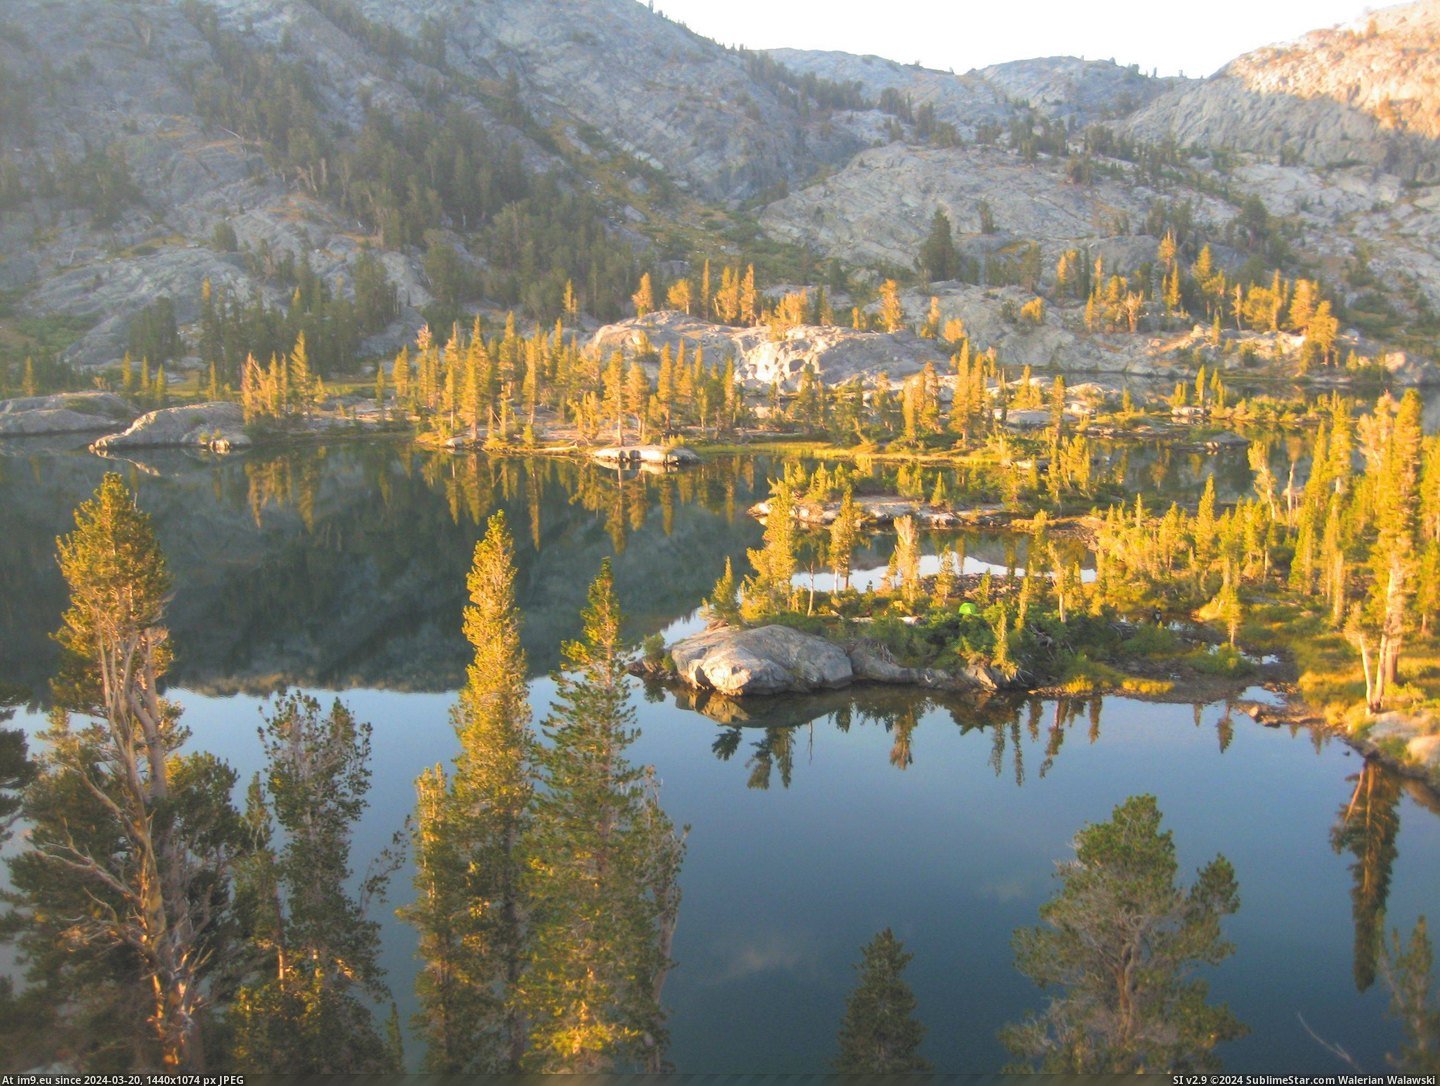 #National #Lake #3072x2304 #Inyo #Weber #Summer #Forest [Earthporn] Weber Lake, Inyo National Forest [3072x2304] - Summer 2013 Pic. (Image of album My r/EARTHPORN favs))